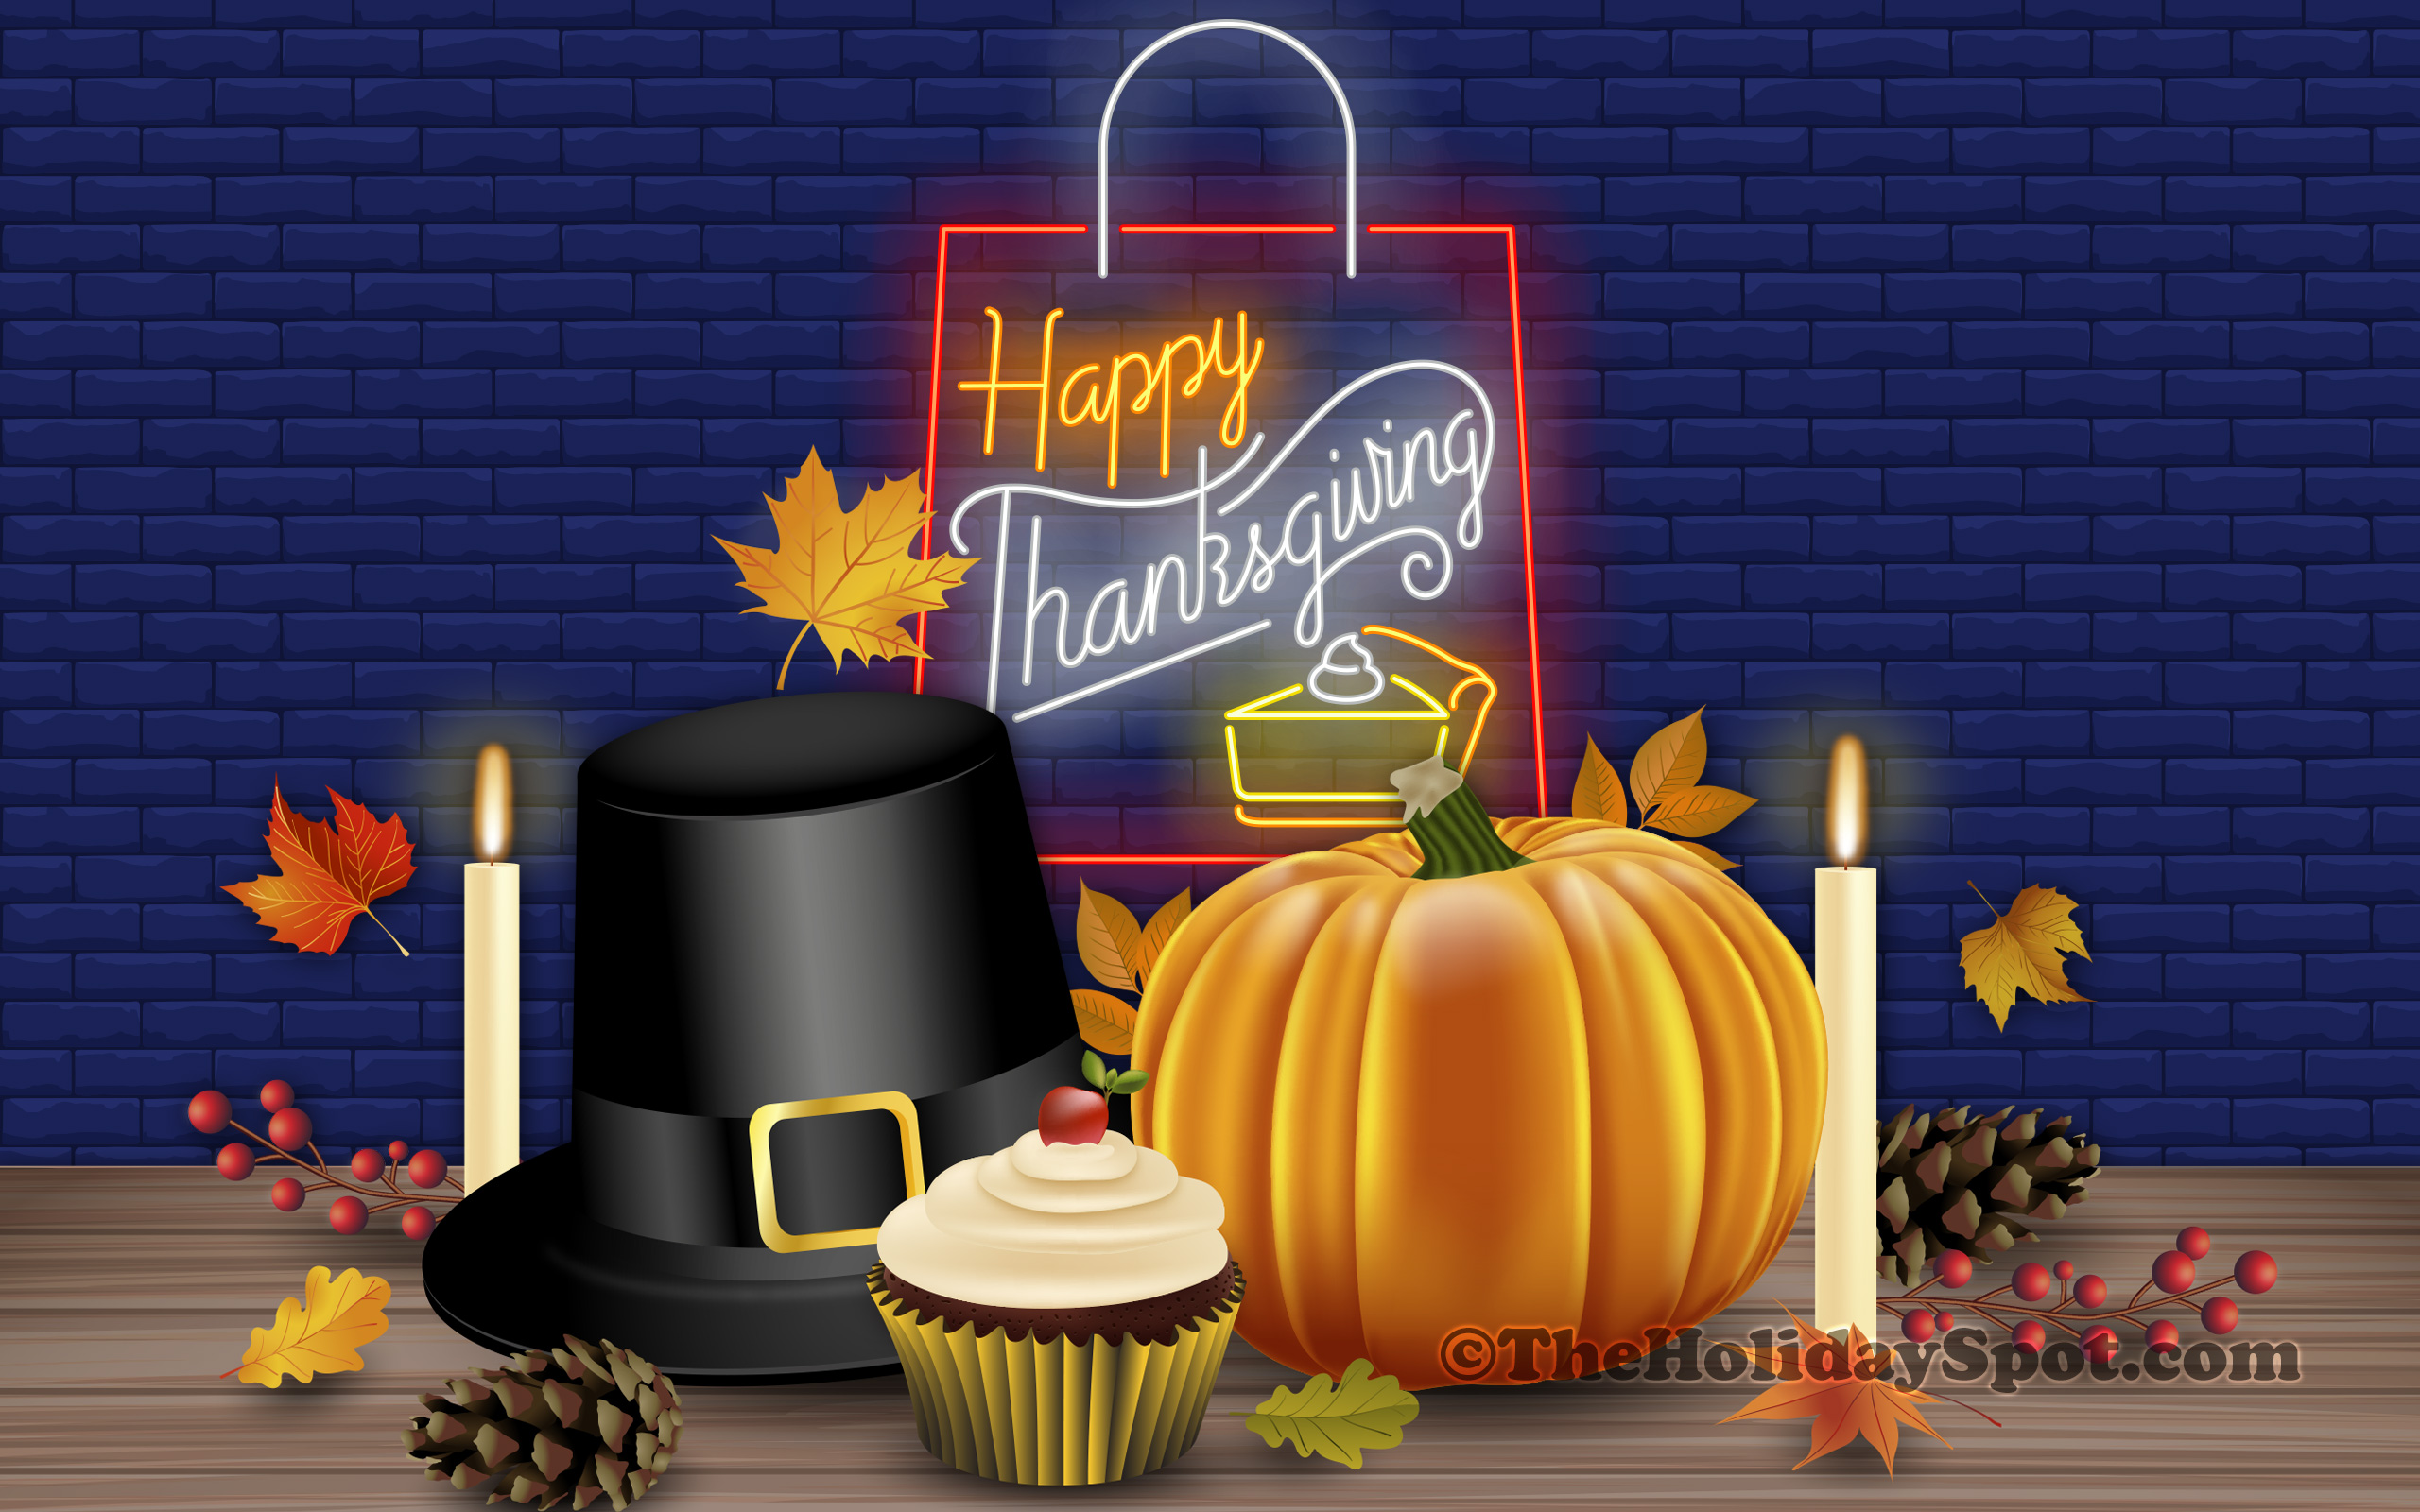 Thanksgiving wallpapers hd happy thanksgiving wallpaper desktop and backgrounds images